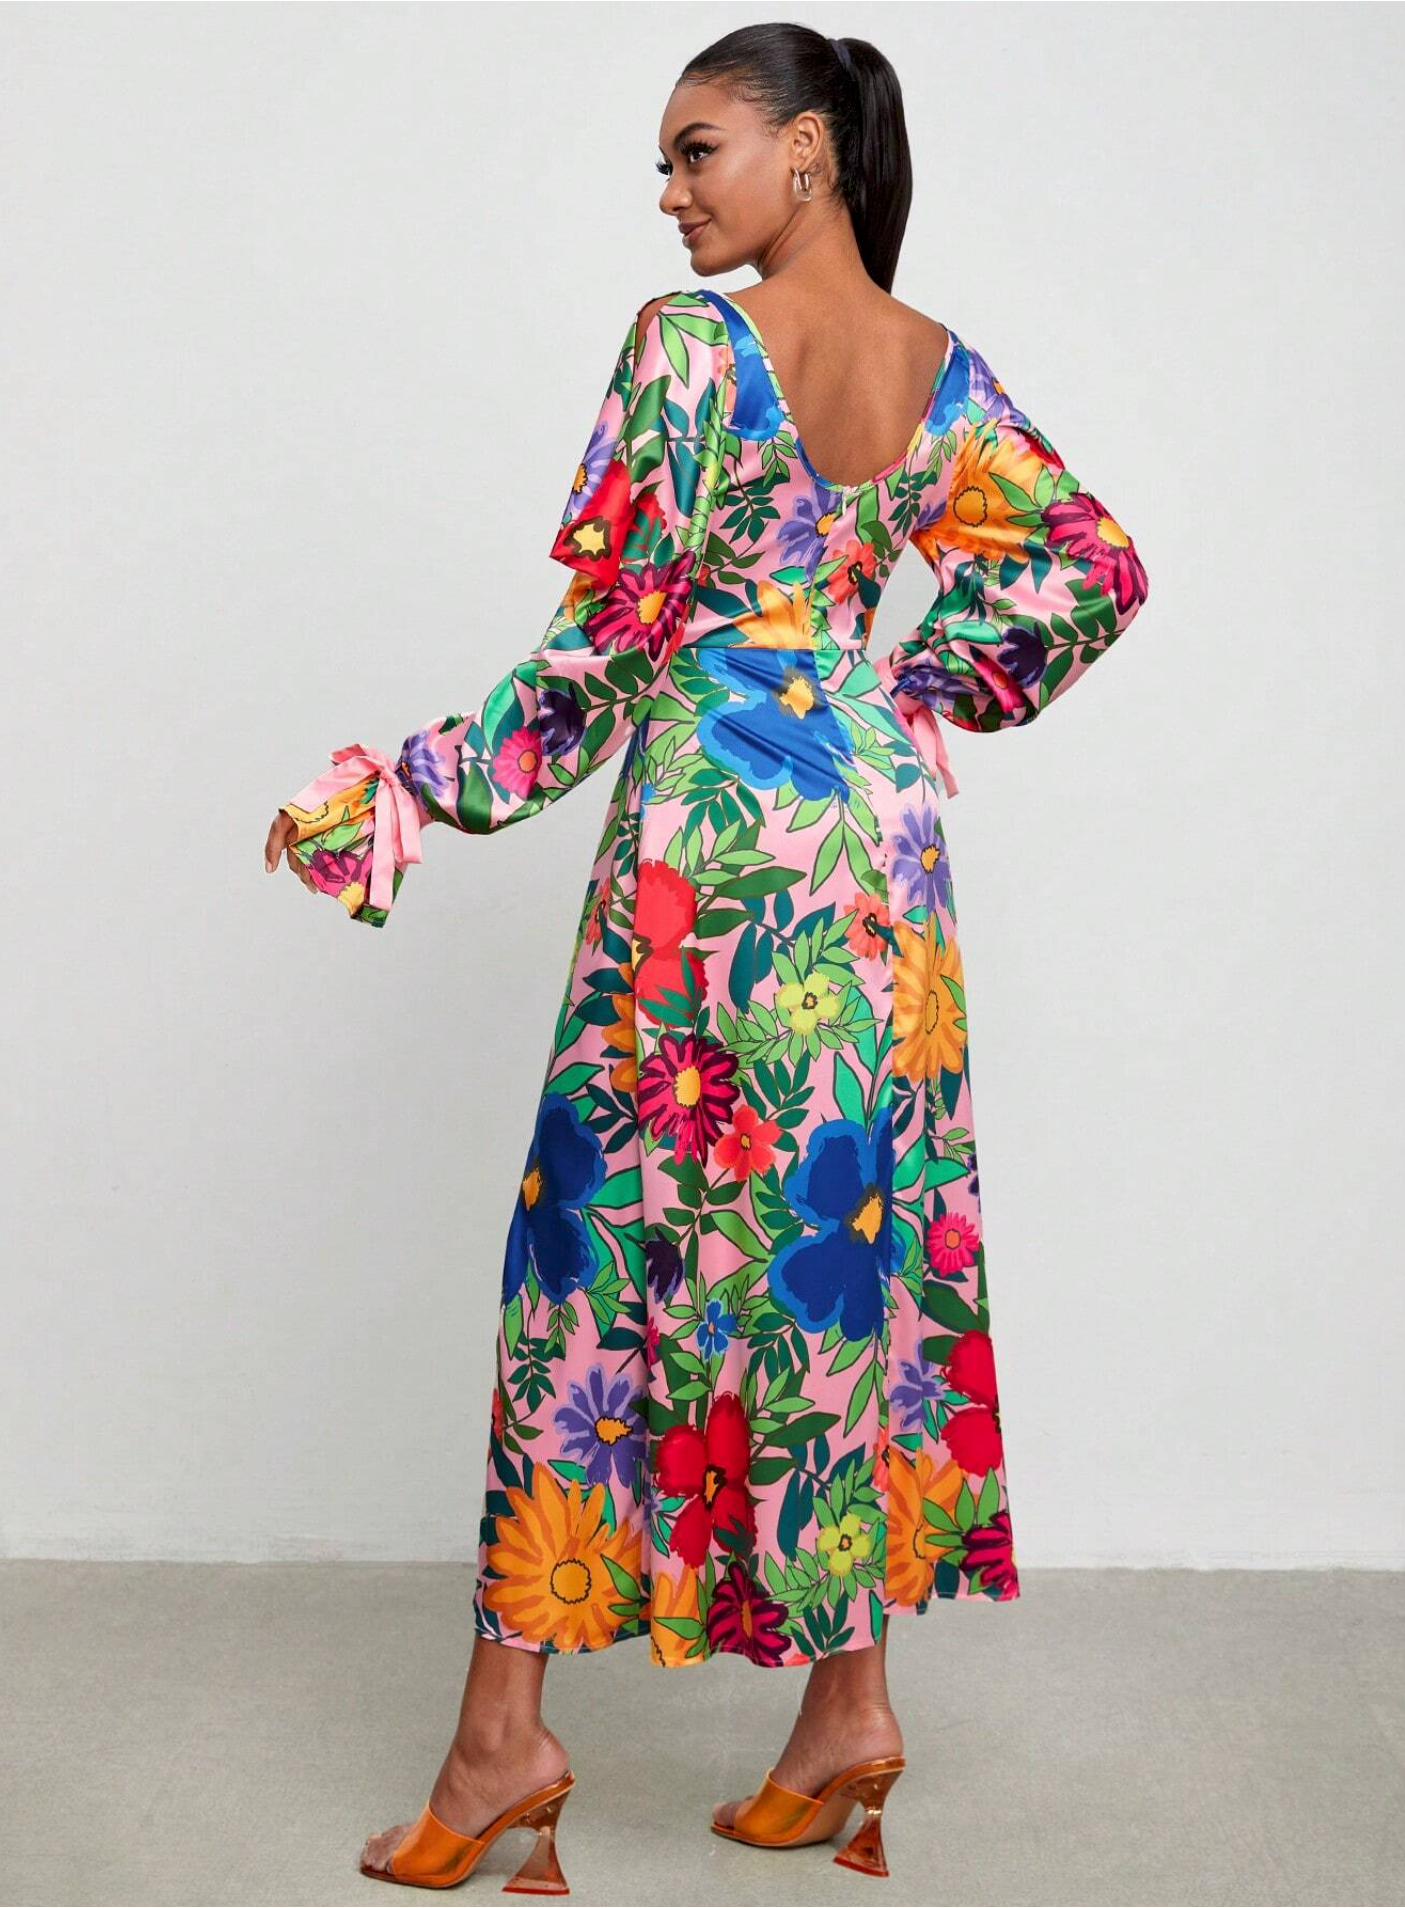 BELANGE HANDMADE X SHEIN - Floral Print Flare Sleeve Split Thigh Dress - Available on SHEIN.COM Only